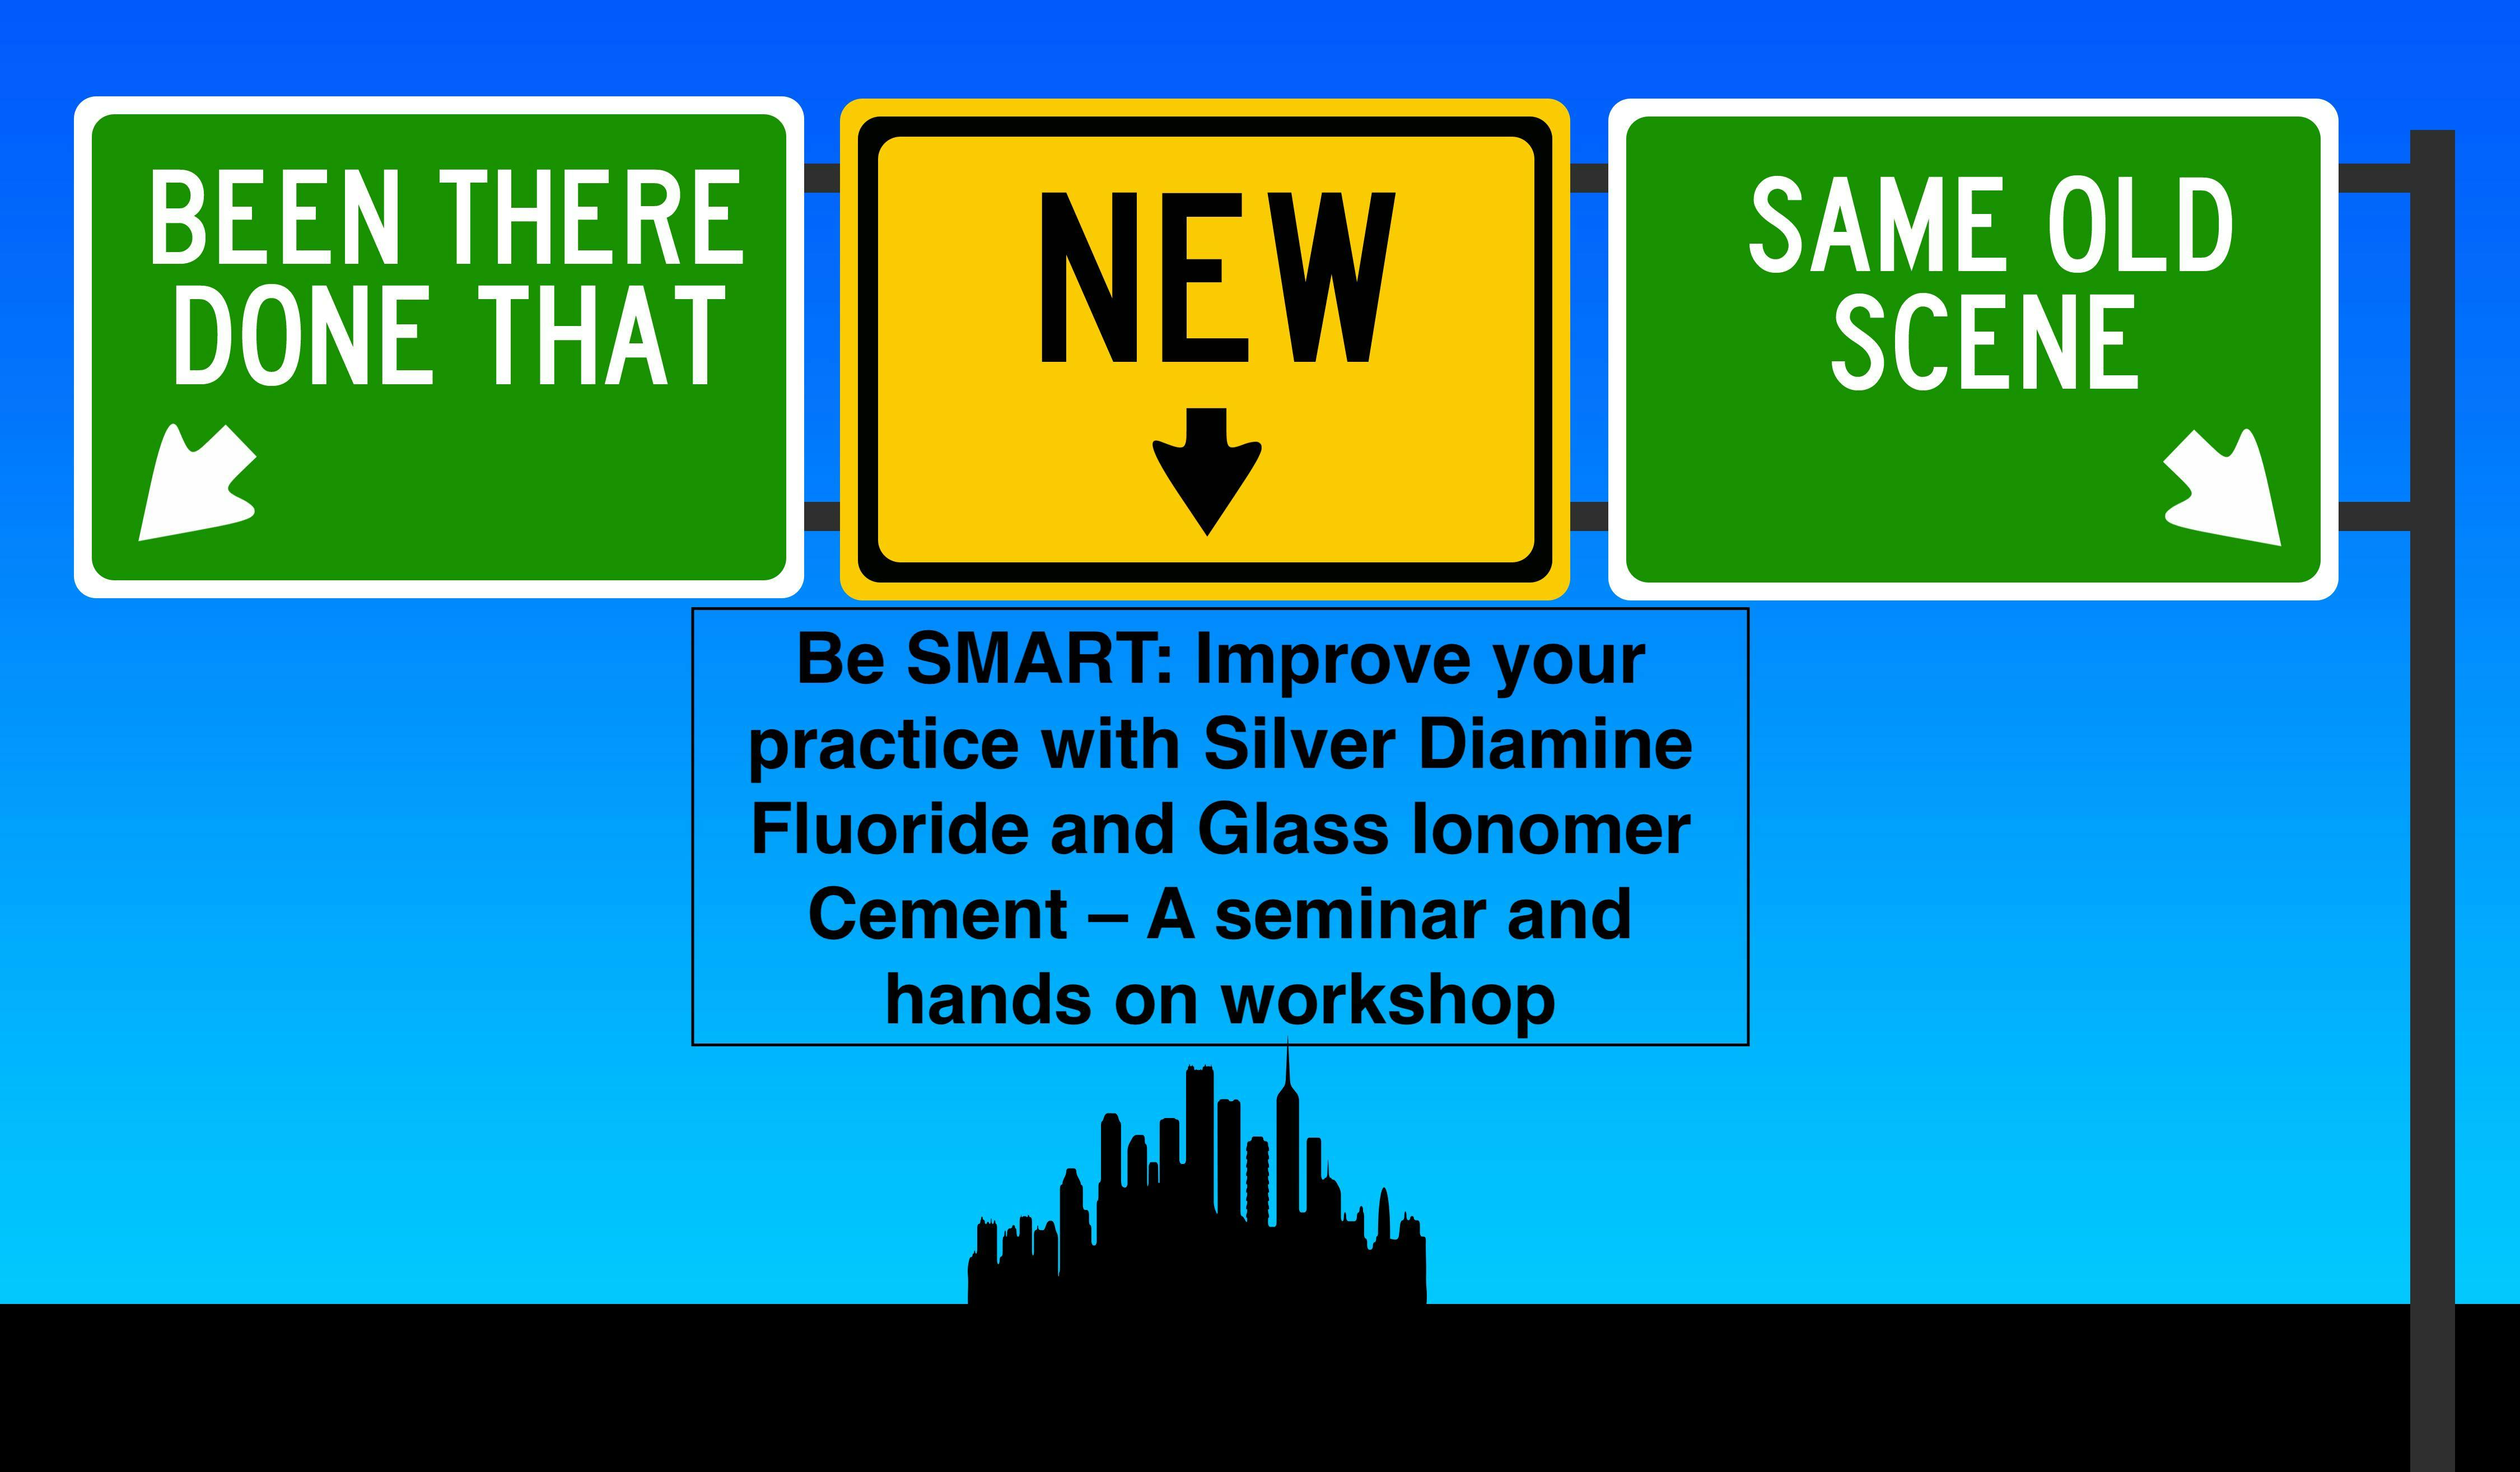 Be SMART: Improve your practice with Silver Diamine Fluoride and Glass Ionomer Cement – A seminar and hands on workshop